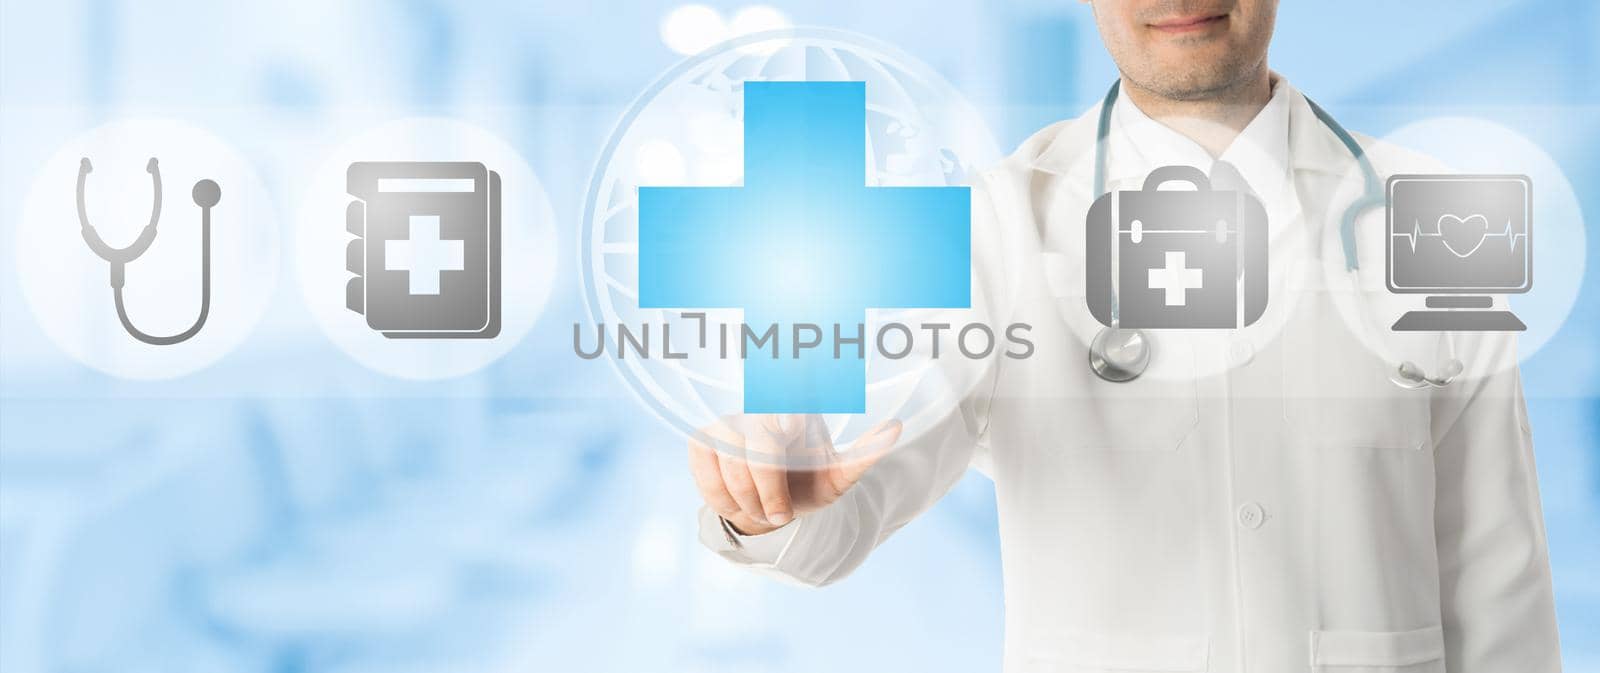 Healthcare Concept - Doctor points at medical cross with other medical icons showing patient caring and health examination technology display on blue abstract background.